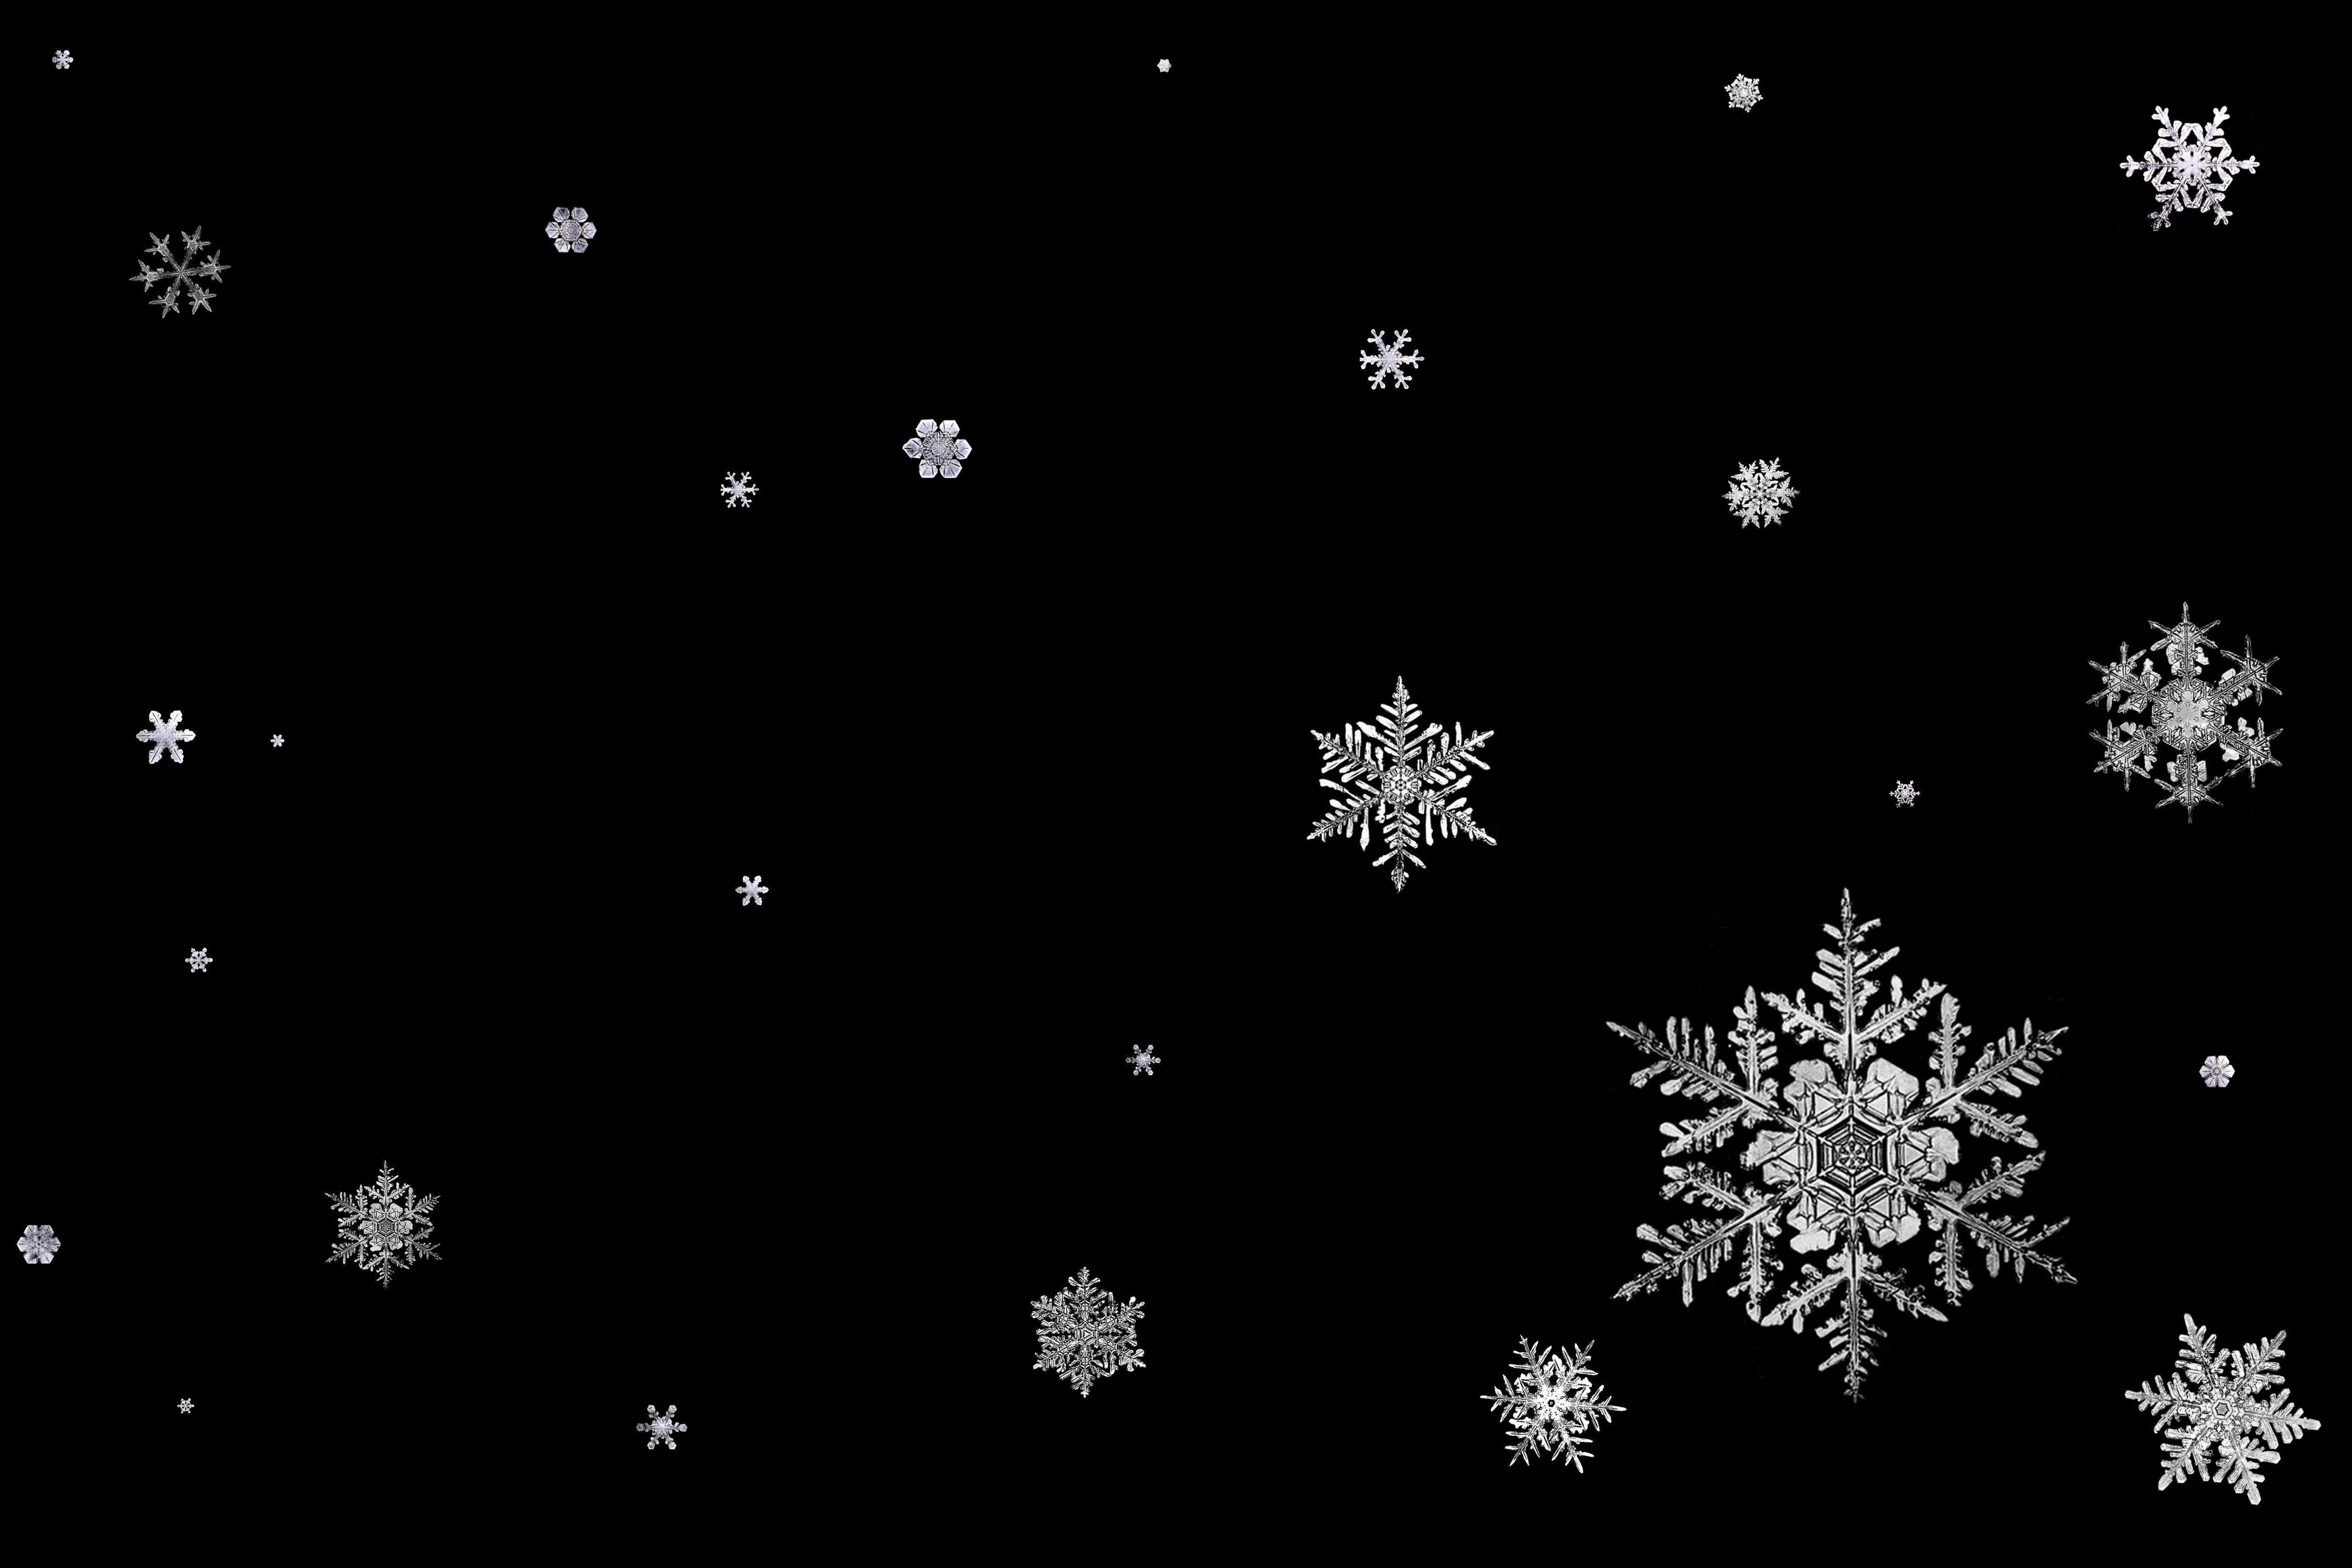 Snow Flake Backgrounds - Wallpaper Cave